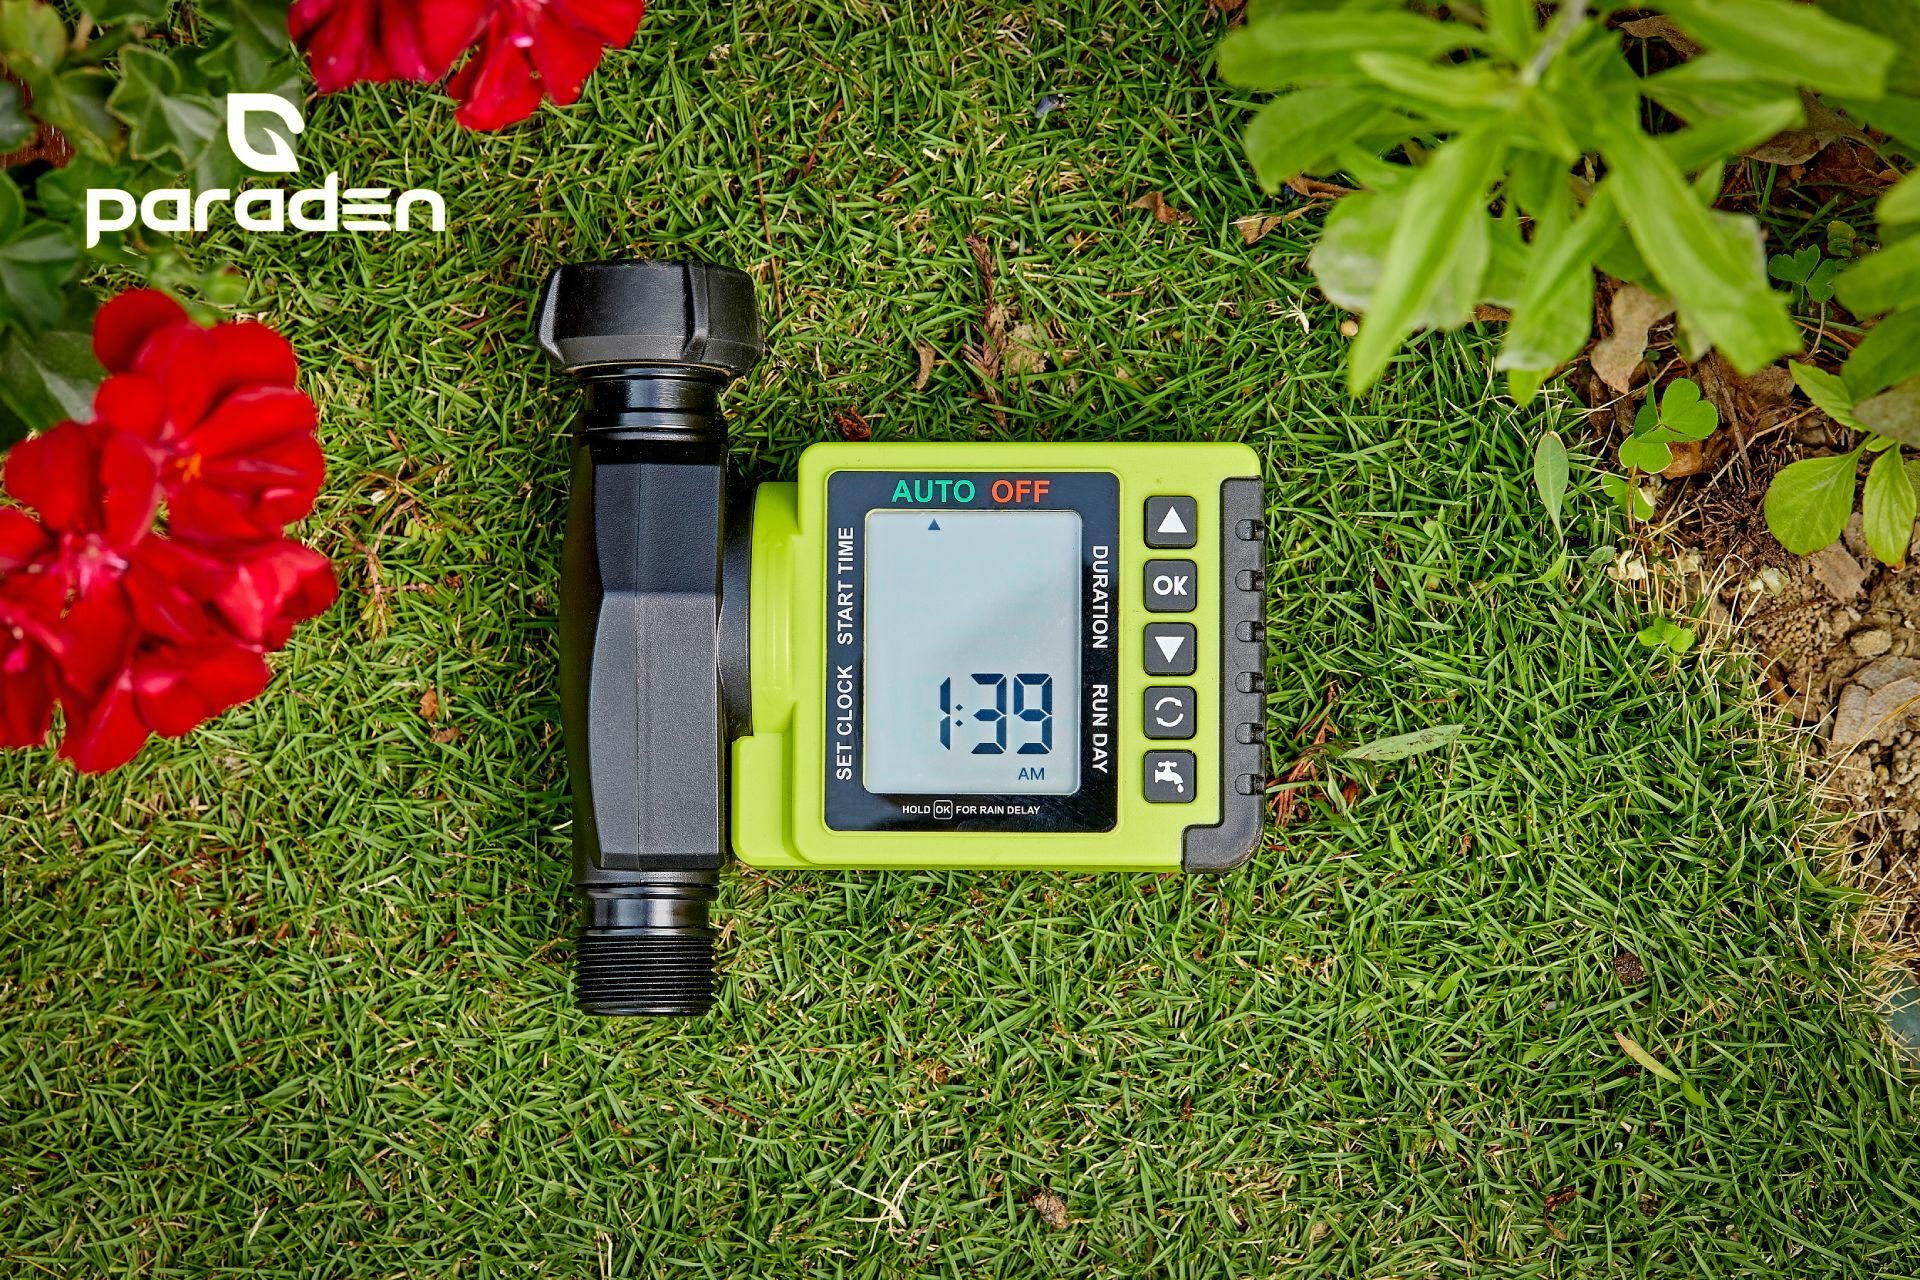 Paraden professional watering timer with rotatable screen